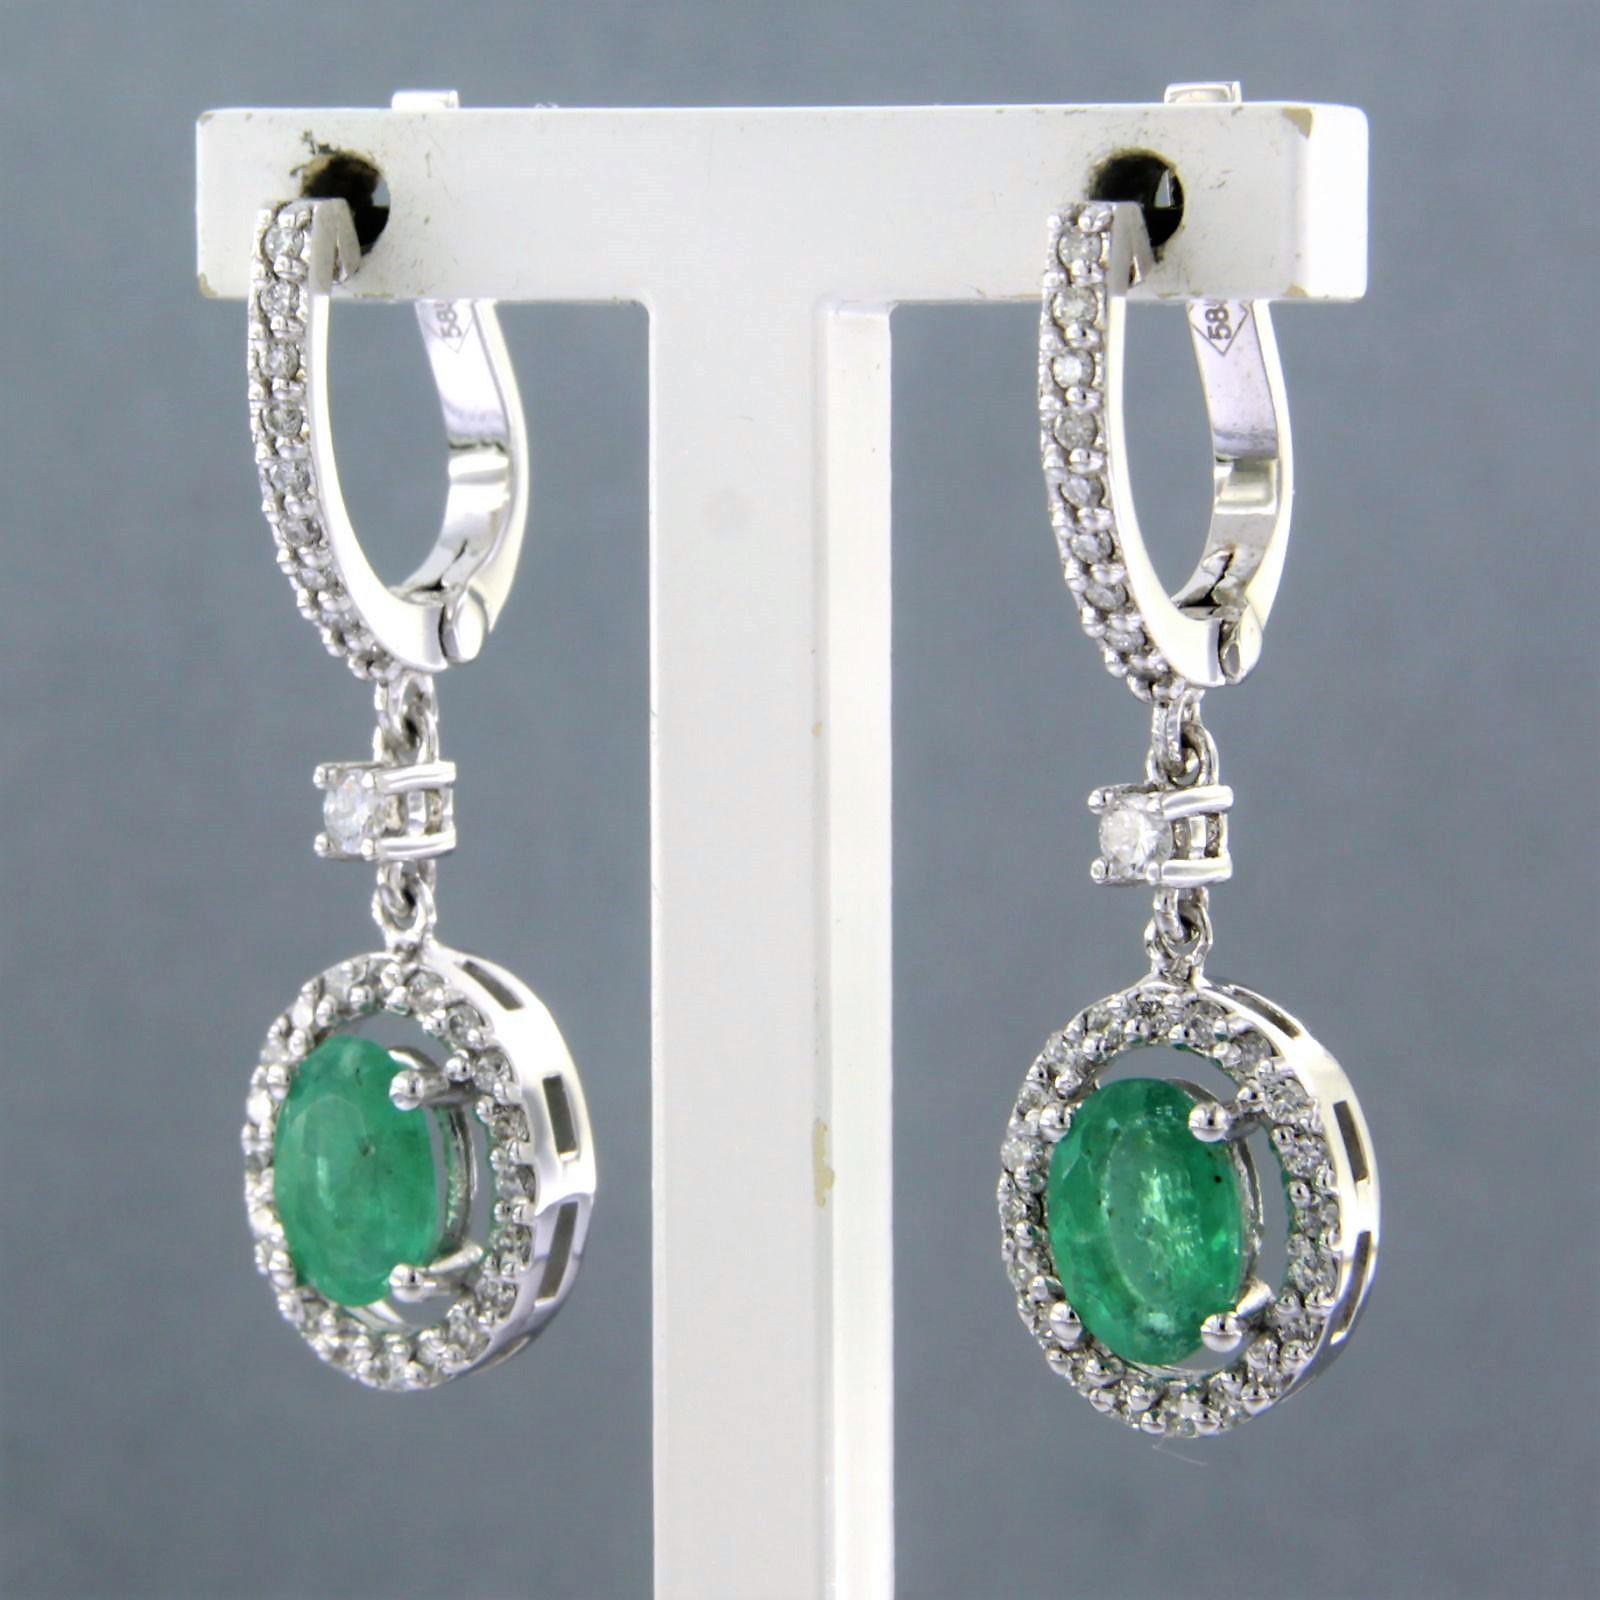 Brilliant Cut Earrings set with emerald and diamonds 14k white gold For Sale